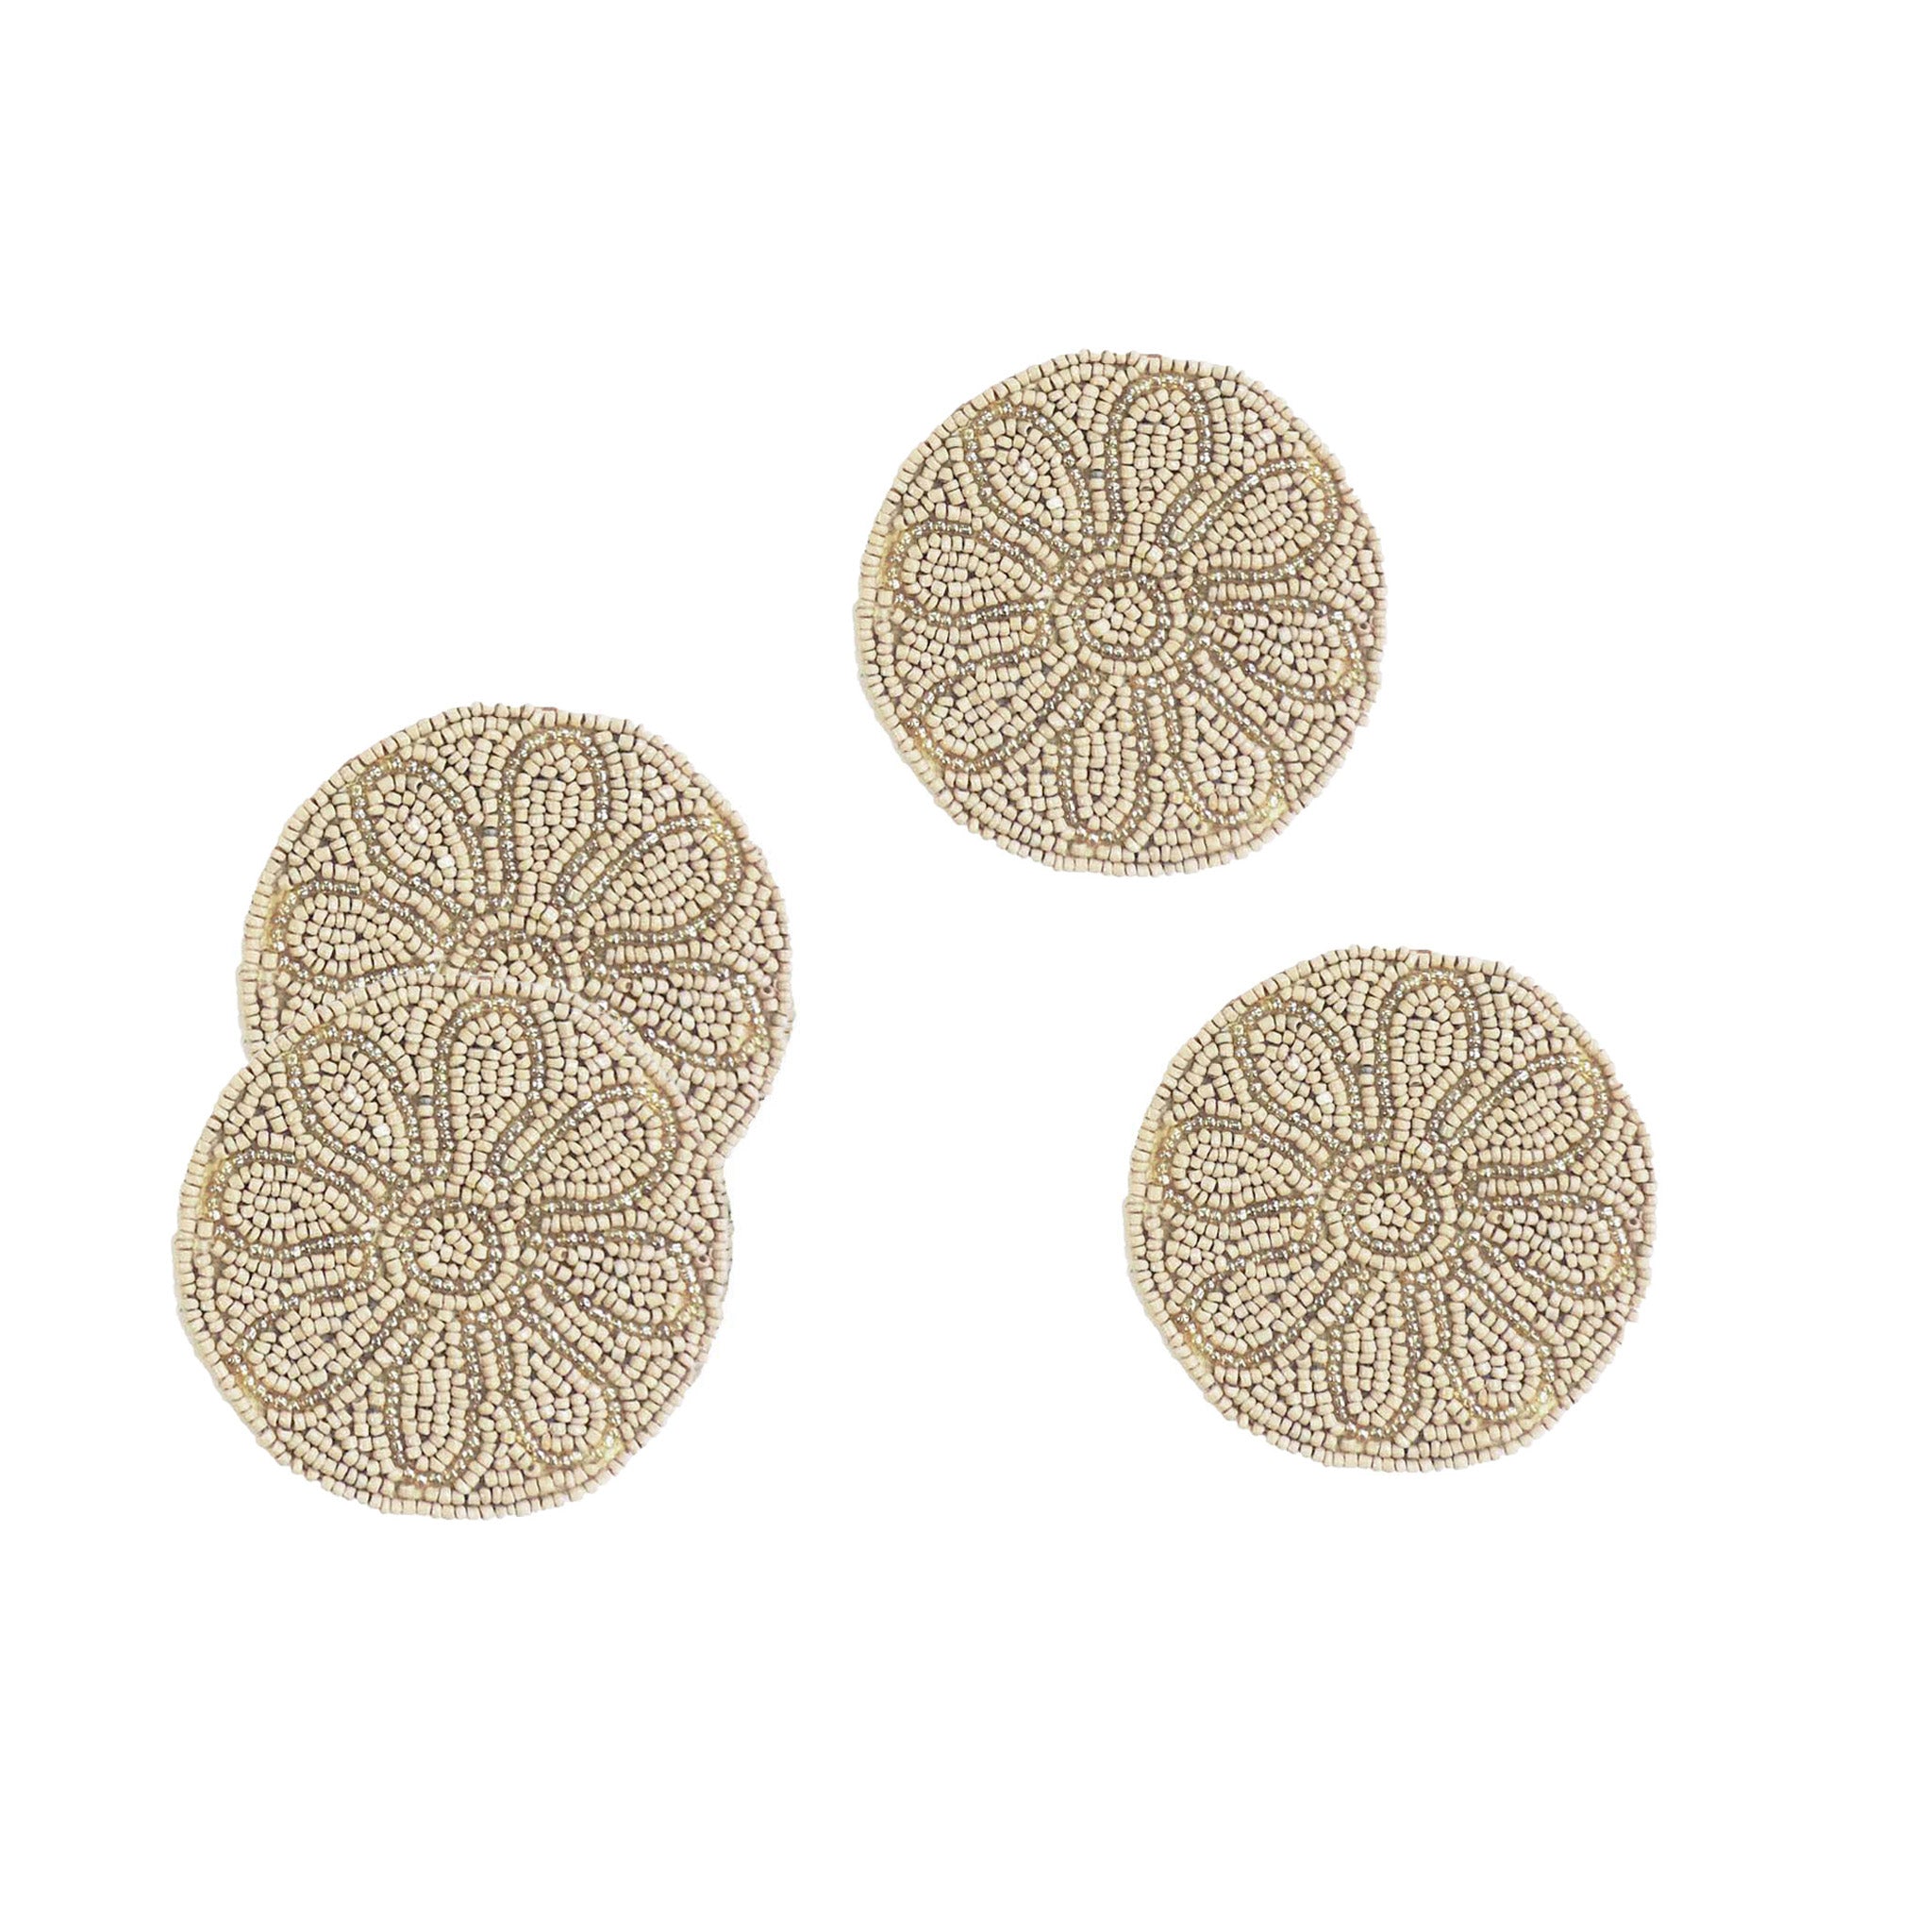 Petal Impressions Embroidered Coaster in Dusty Pink, Set of 4